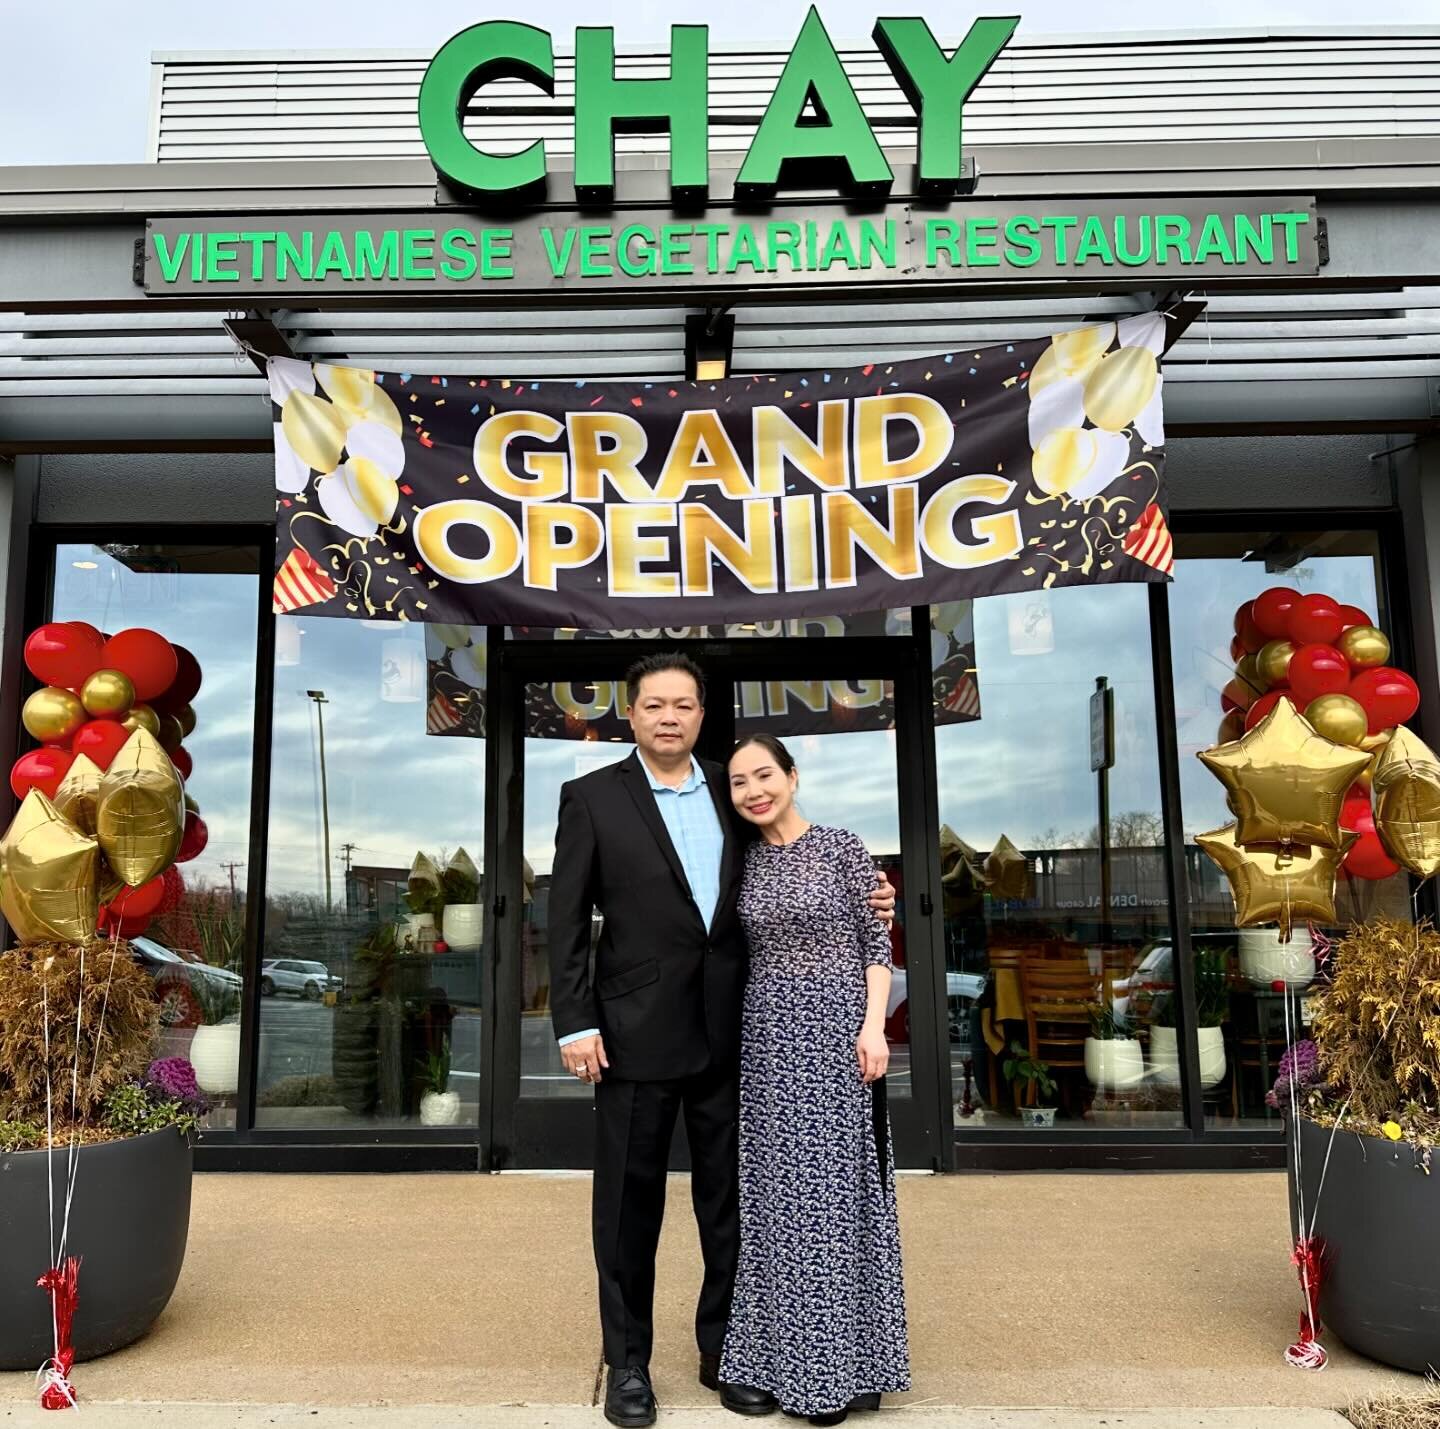 It&rsquo;s incredible to think that exactly two months ago today, we welcomed our first guests to Chay during our soft opening! The overwhelming support and praise we&rsquo;ve received since then have far exceeded our wildest dreams. We are so gratef